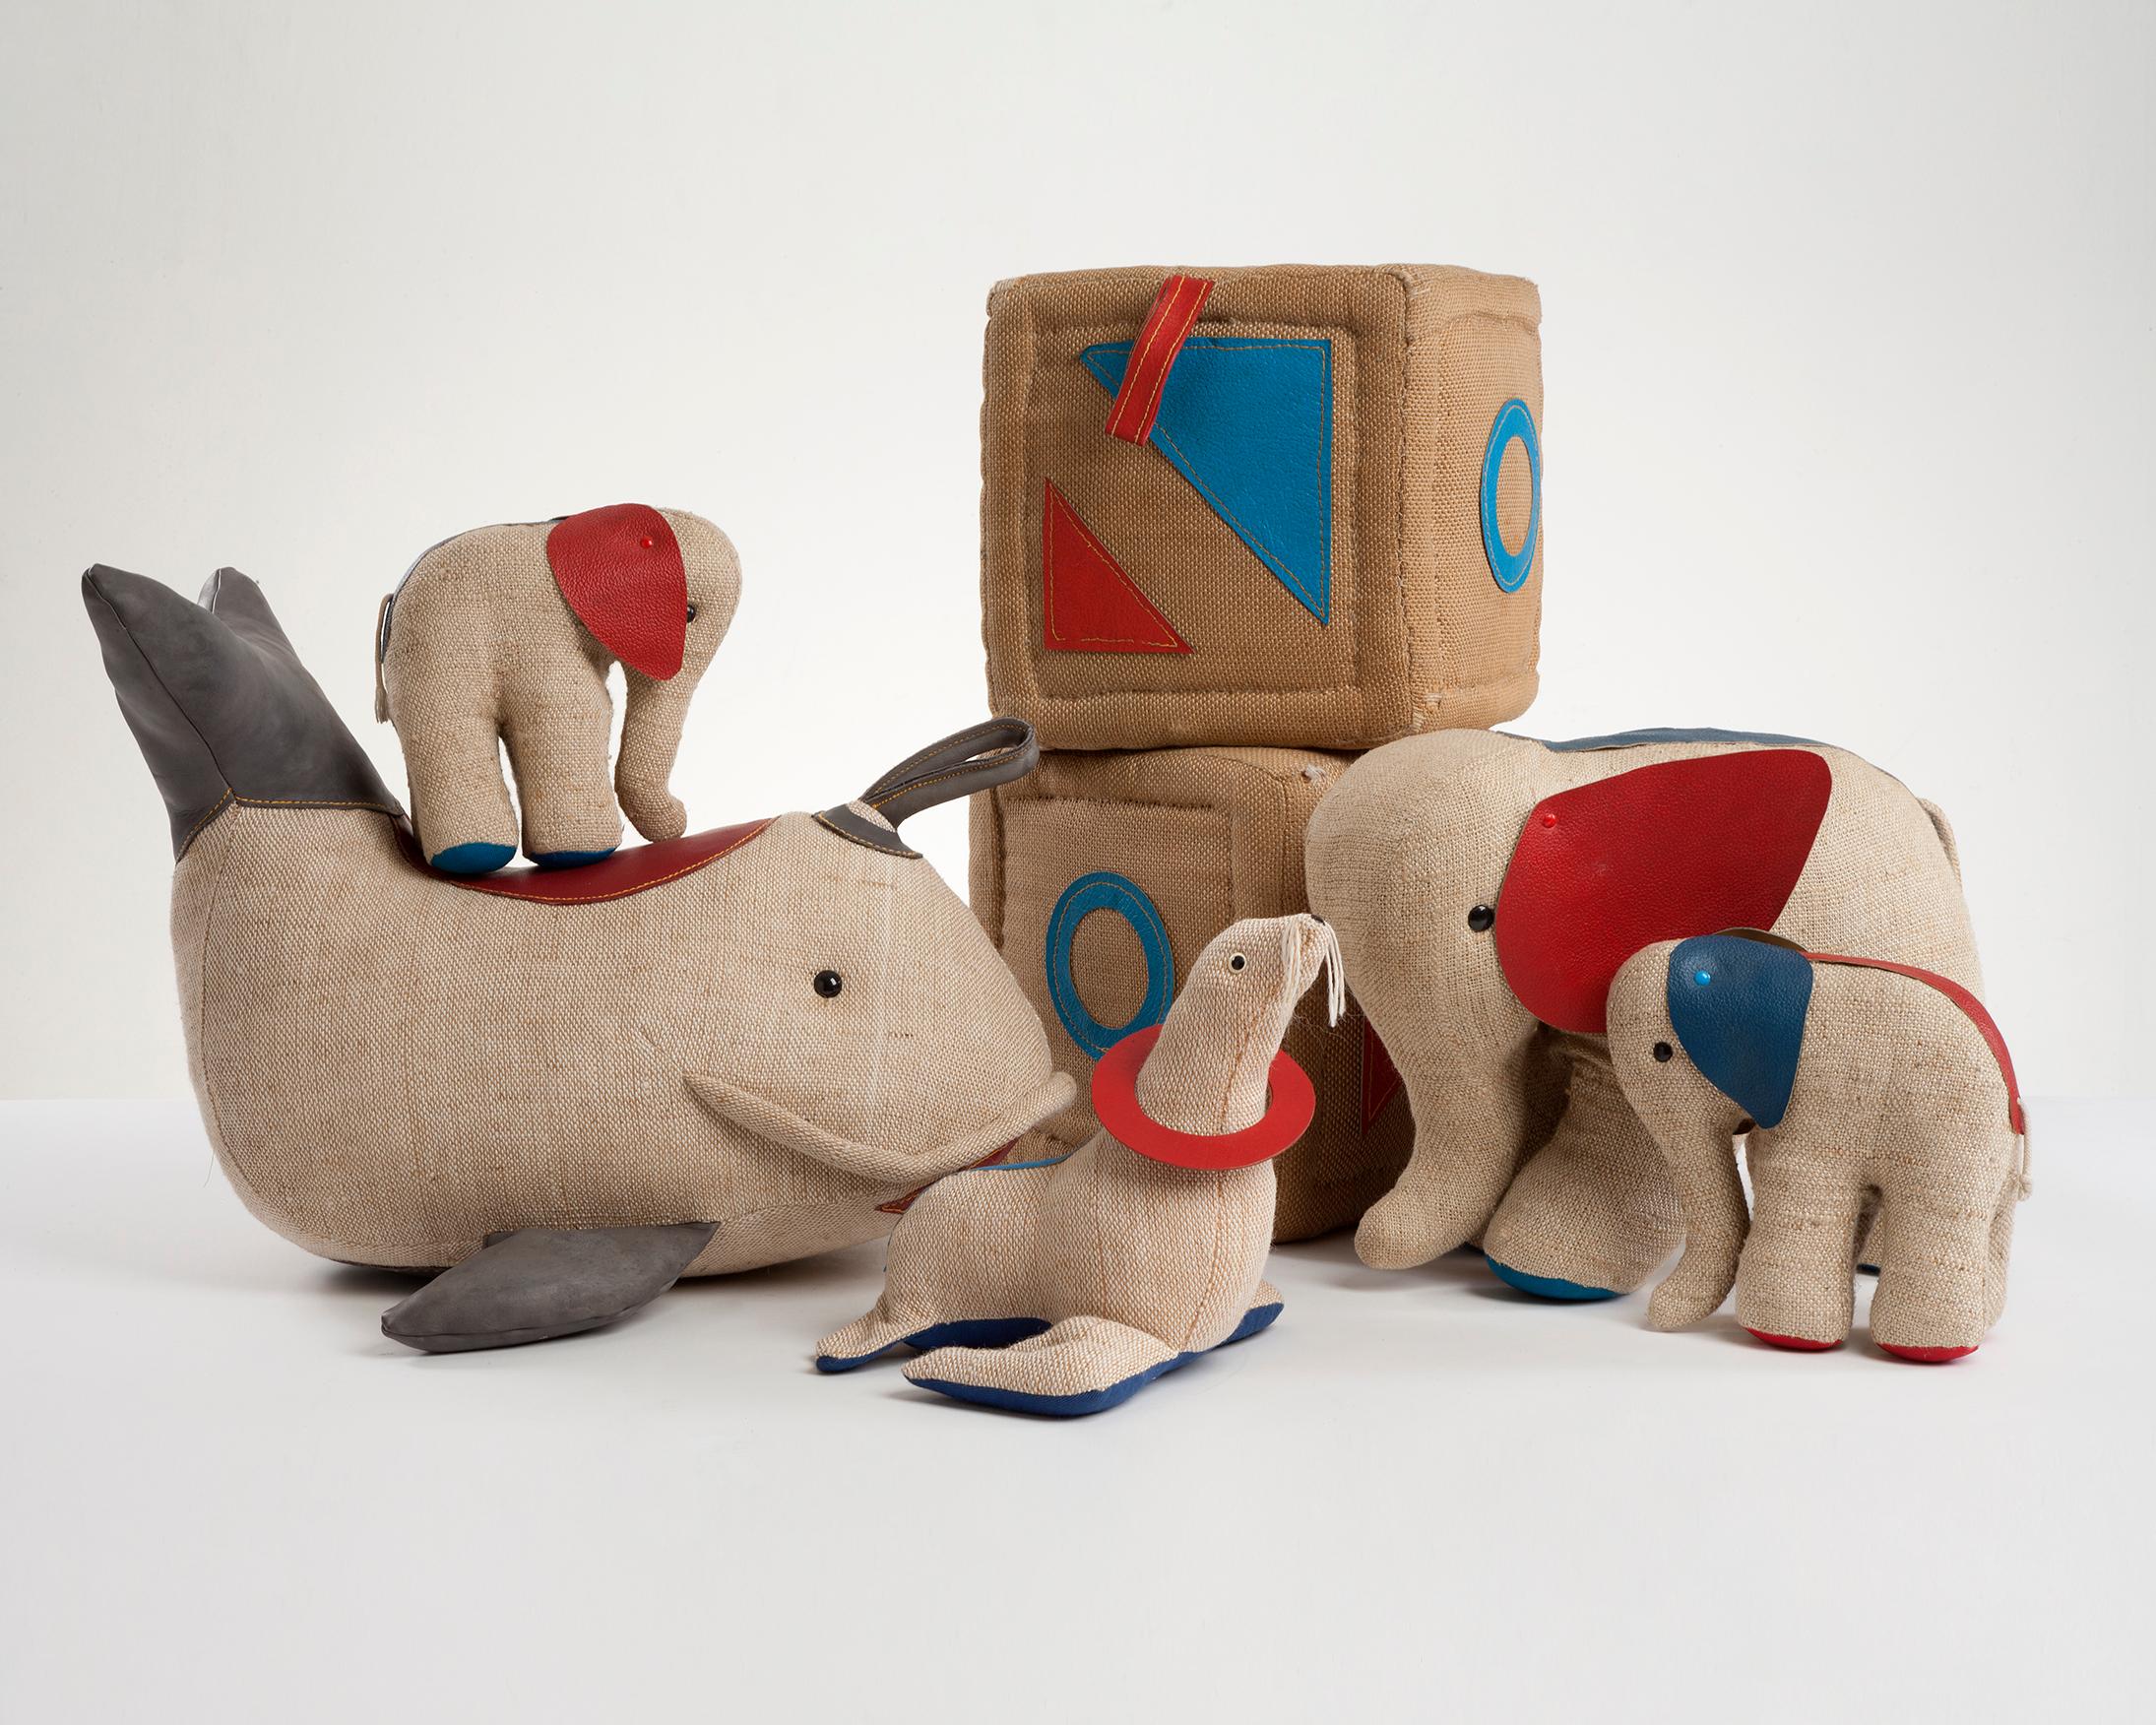 Modern Therapeutic Toy Seal in Jute with Leather by Renate Müller, 1965-1971